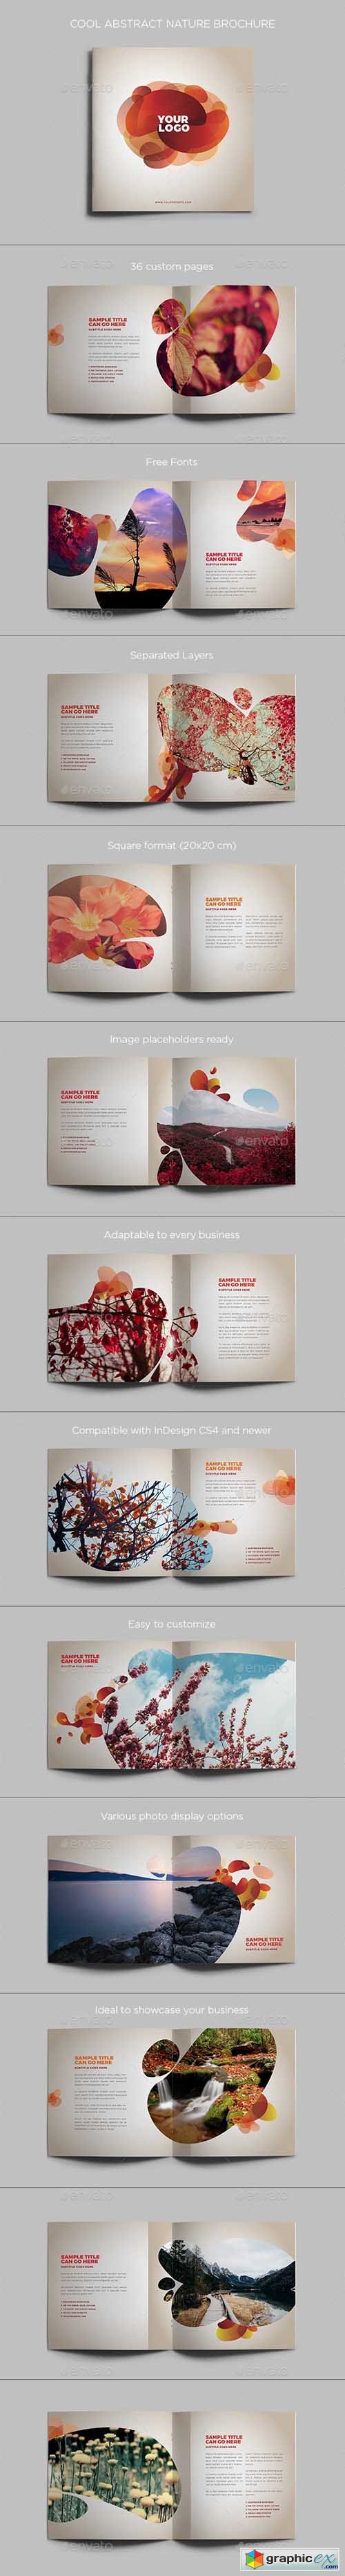 Cool Abstract Nature Brochure